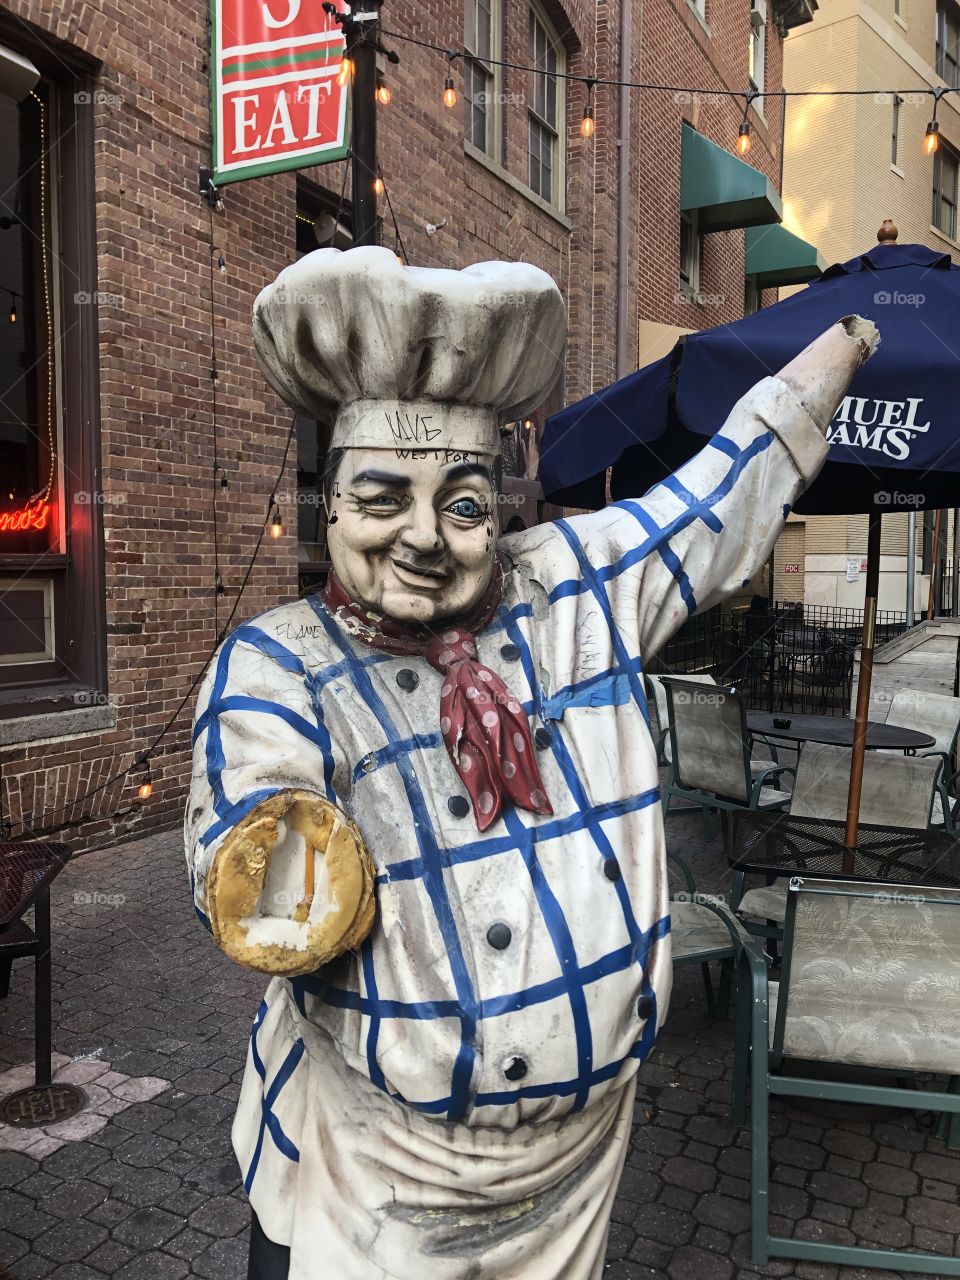 The “Chef” outside of Supano’s SUPANO'S PRIME STEAKHOUSE SEAFOOD & PASTA Restaurant welcomes you to come in and eat.
#howdidyoureact 